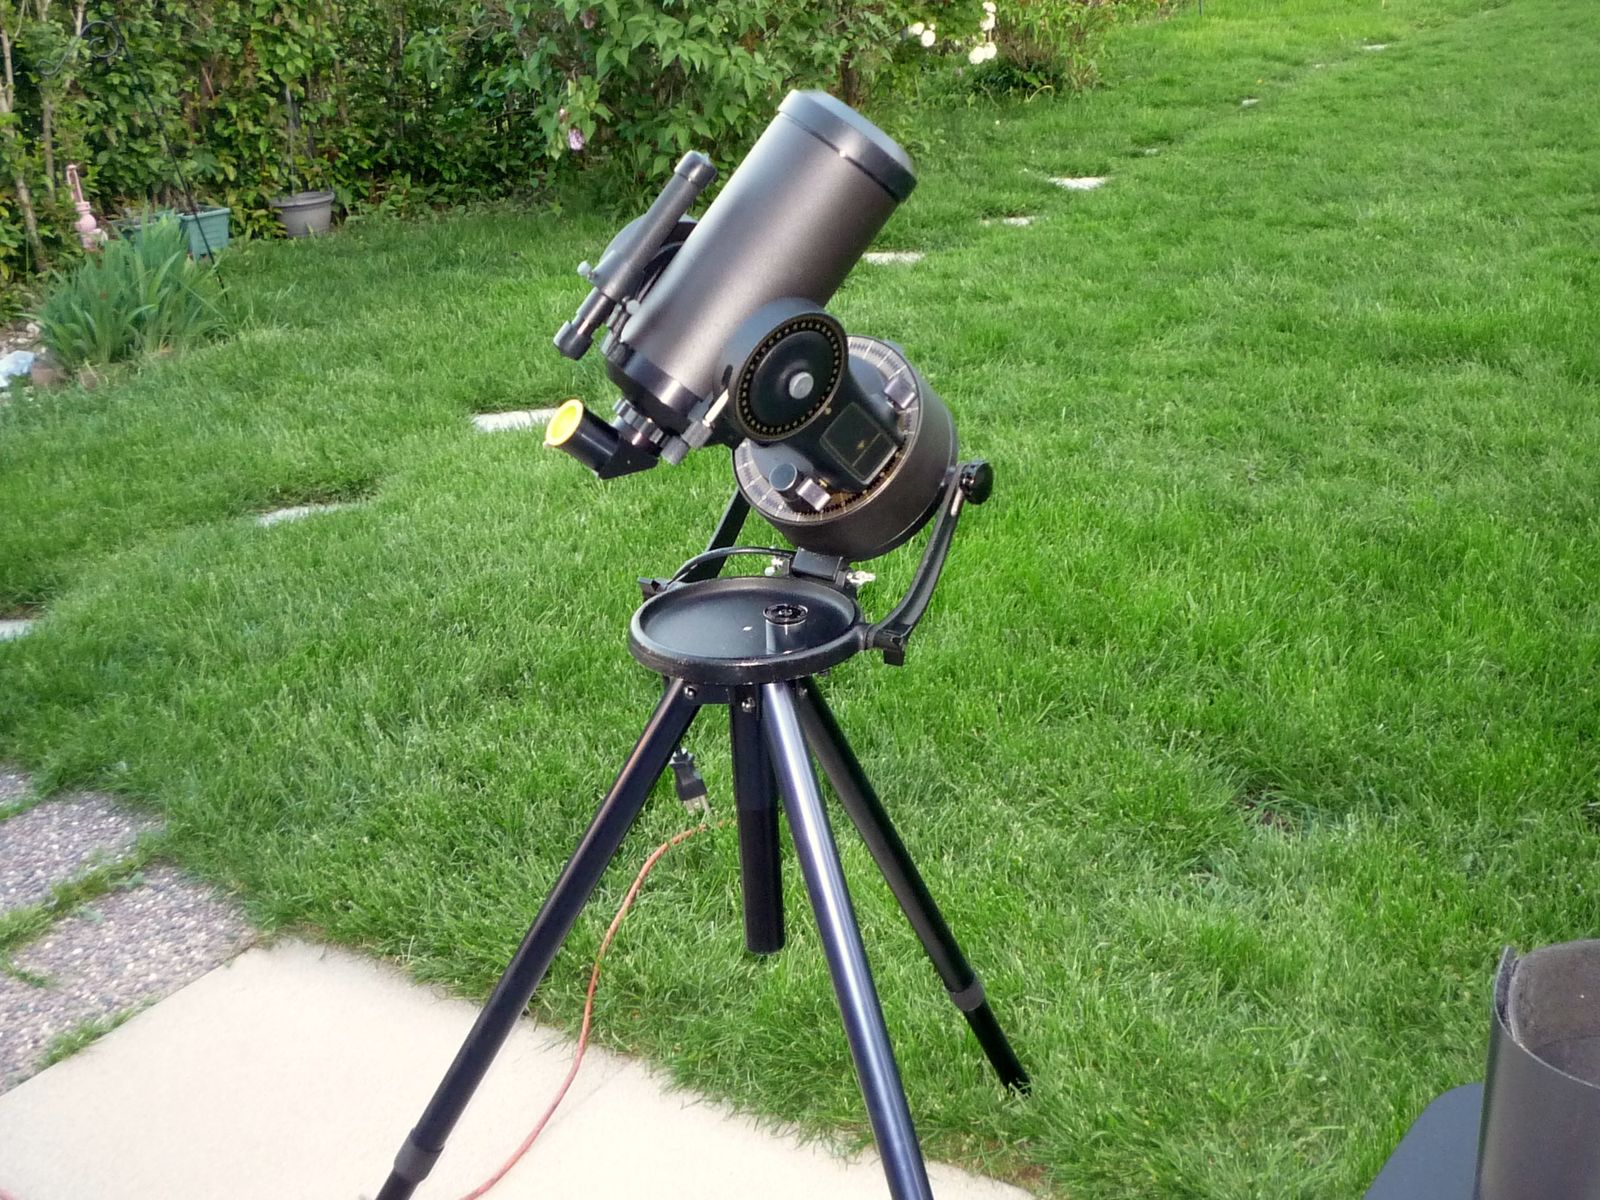 bausch-lomb-4000-classic-telescopes-photo-gallery-cloudy-nights